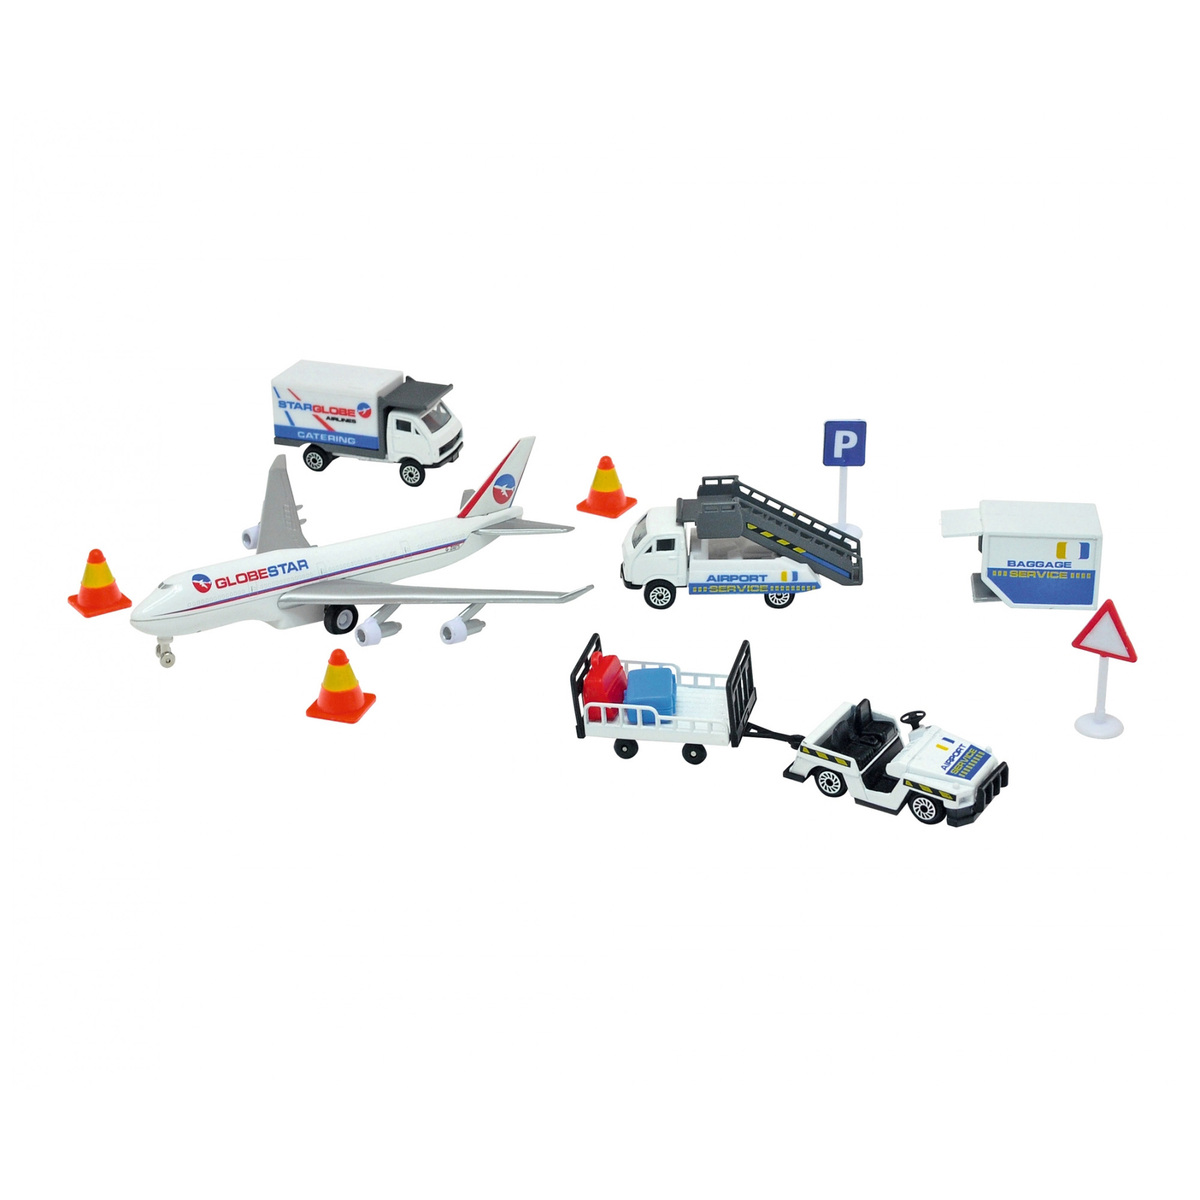 Dickie Airport Play Set, Assorted, 203743001